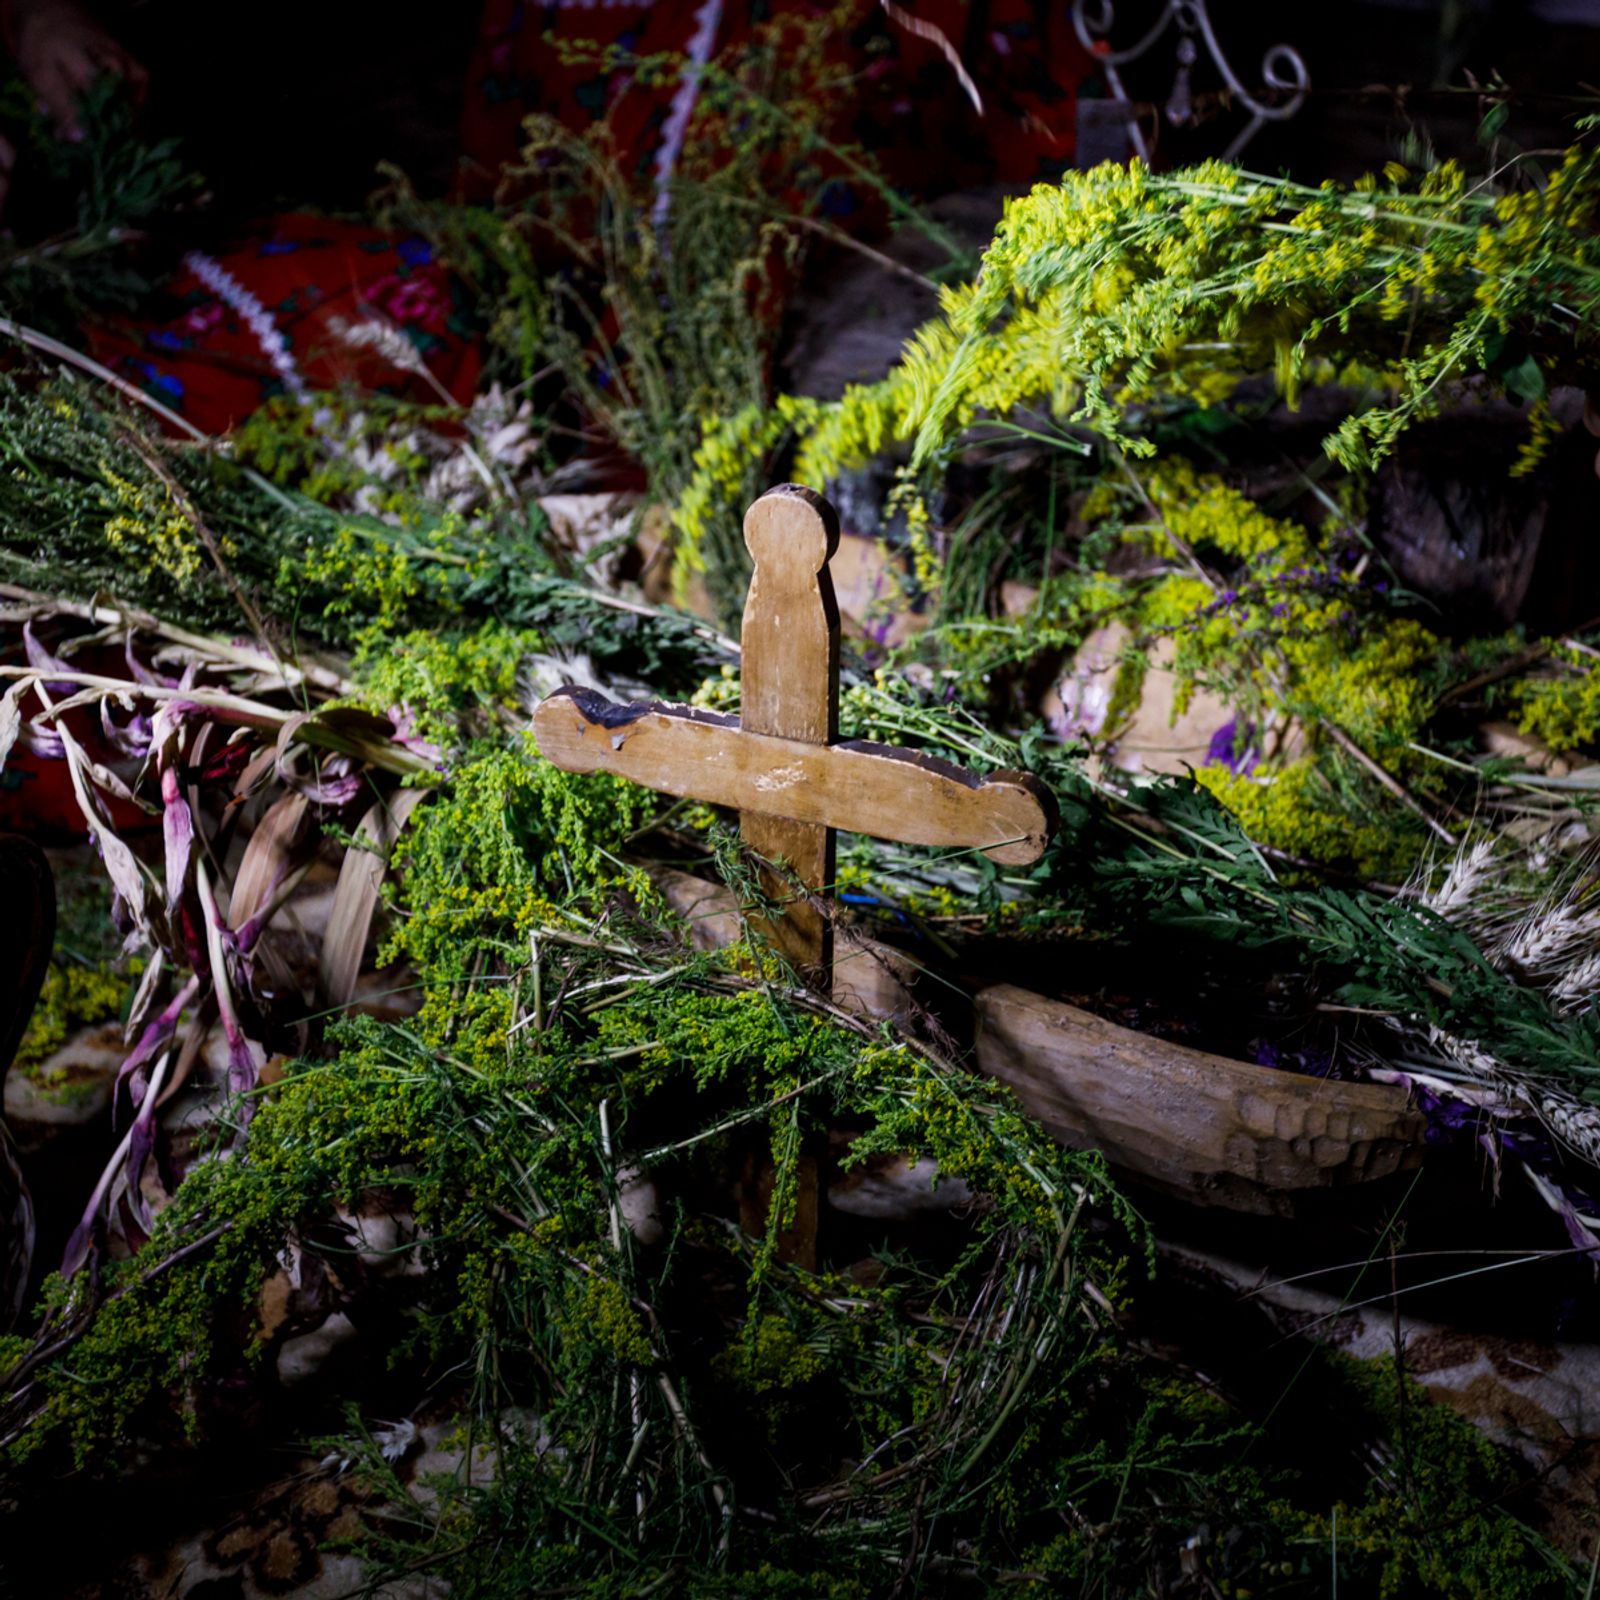 © Johanna Maria Fritz - The crucifix was decorated with plants, for the nocturnal ritual. Mogoșoaia, Romania 2019.